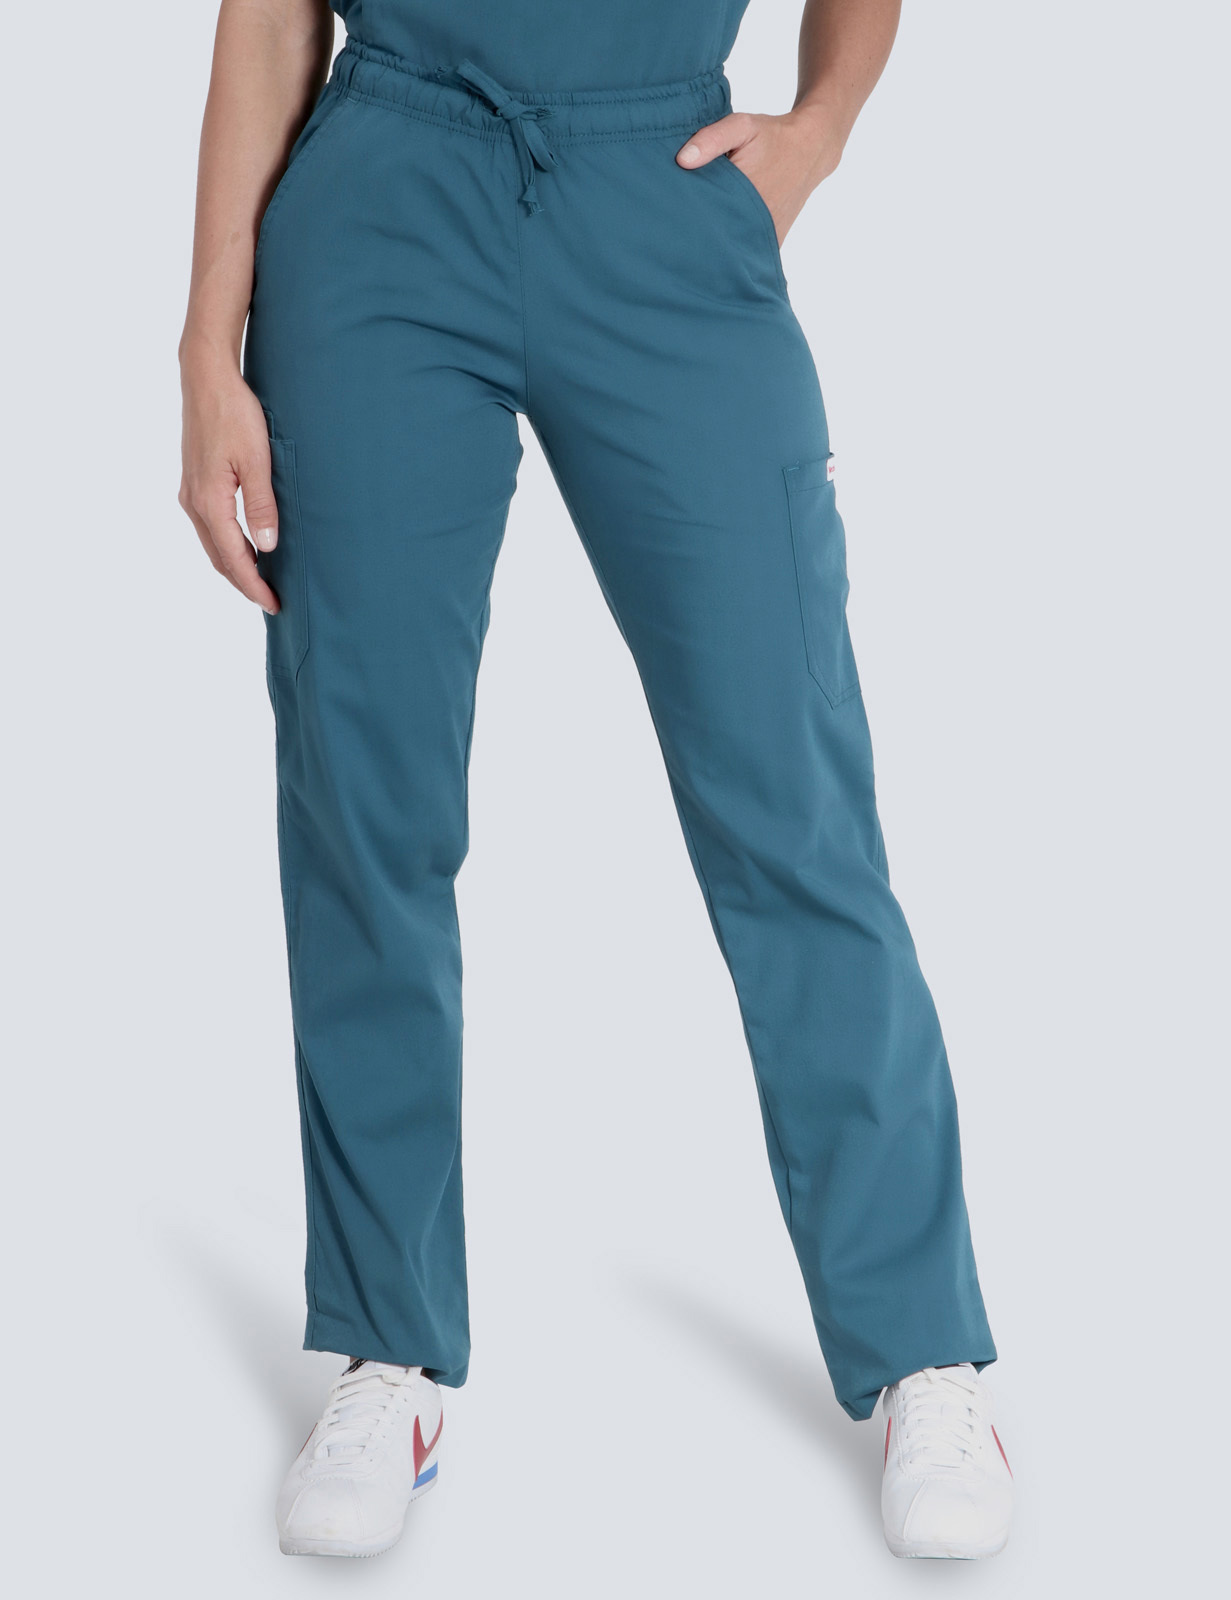 Cargo Pants - St. Vincent's Medical Imaging Sonographer (pants only) (Cargo Pants in Caribbean)